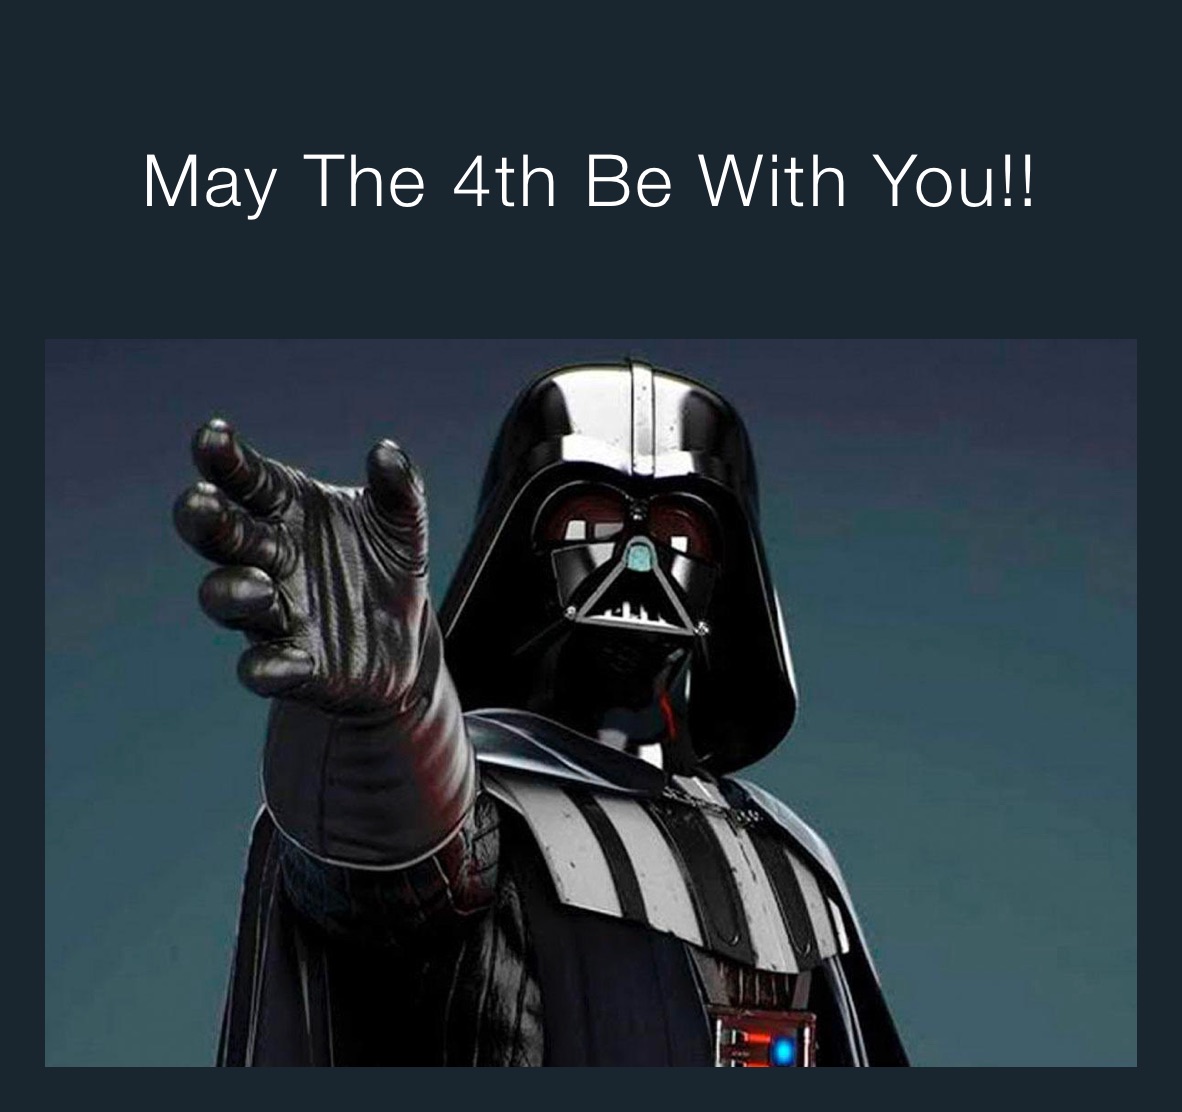 May The 4th Be With You!!